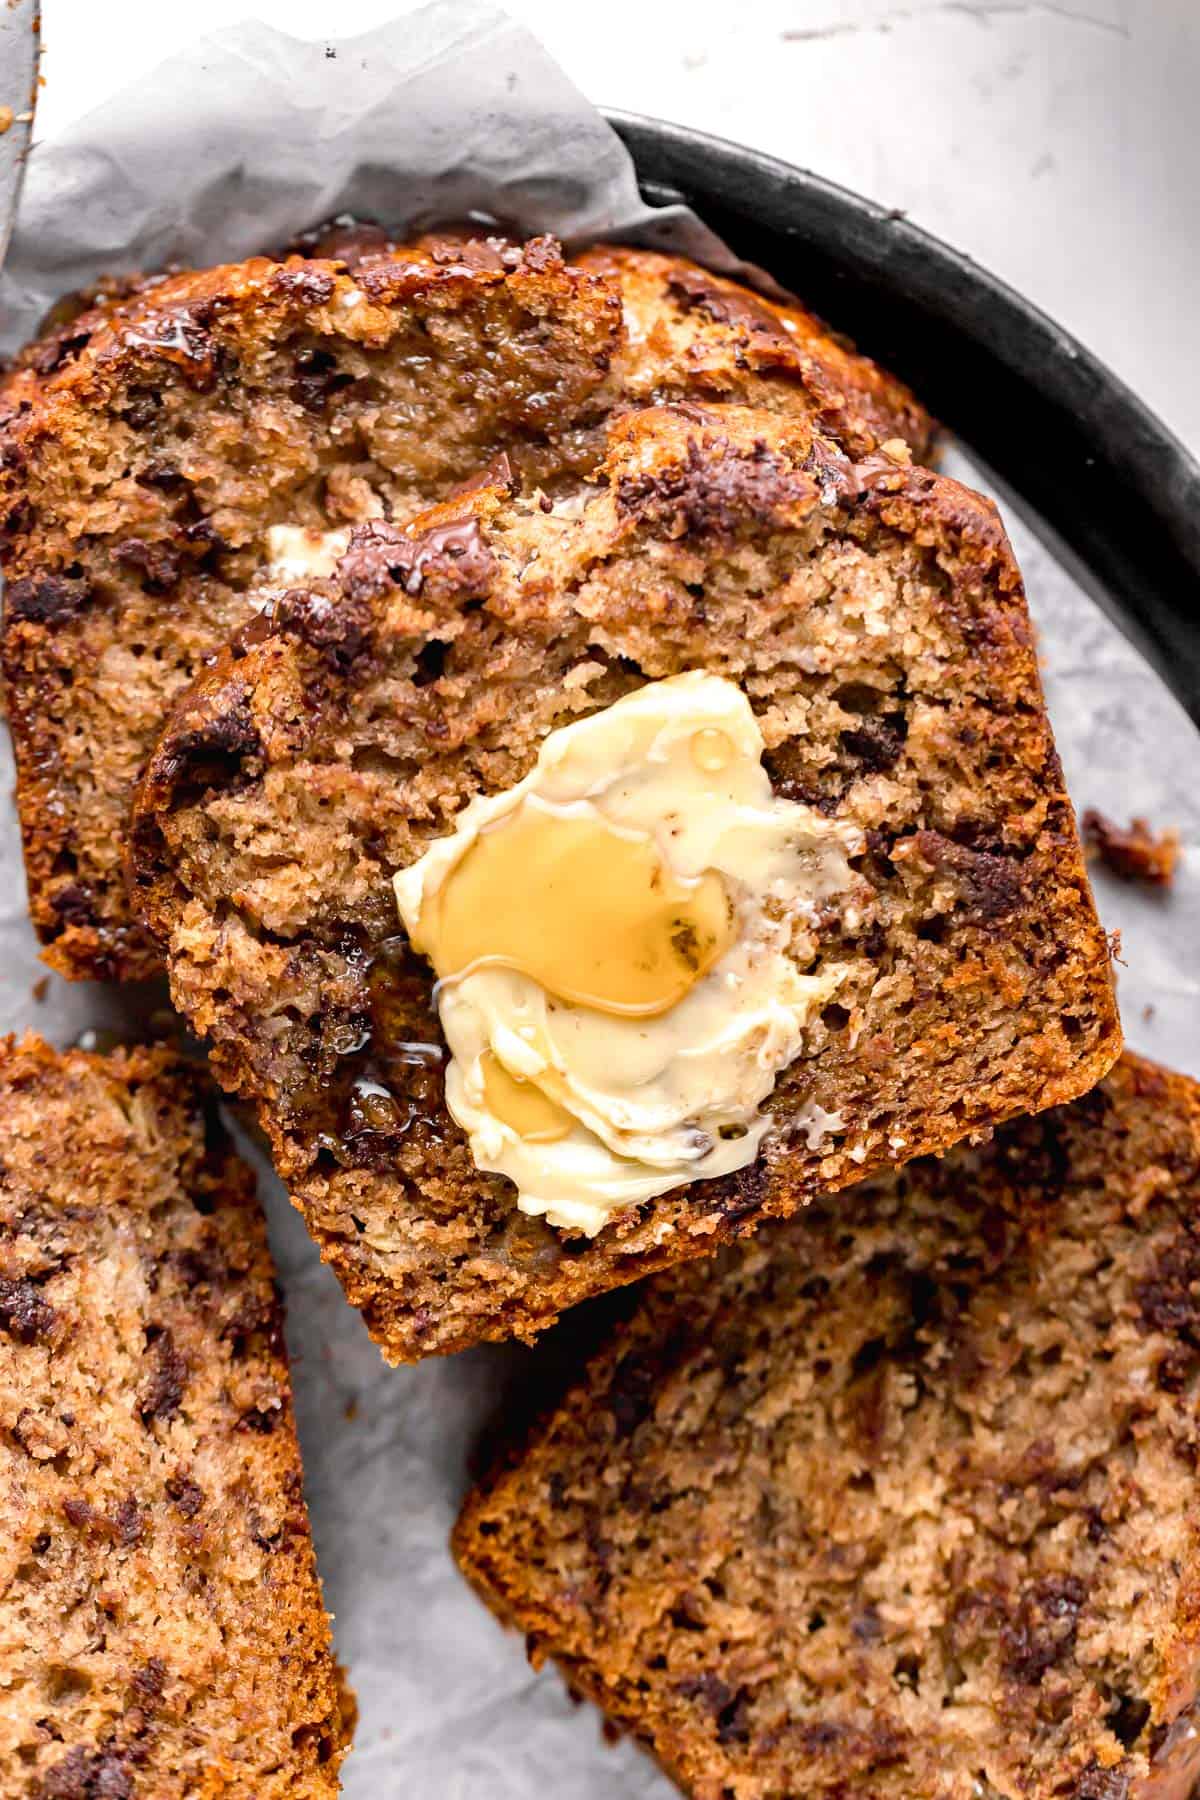 slices of honey banana bread with butter and honey on top.